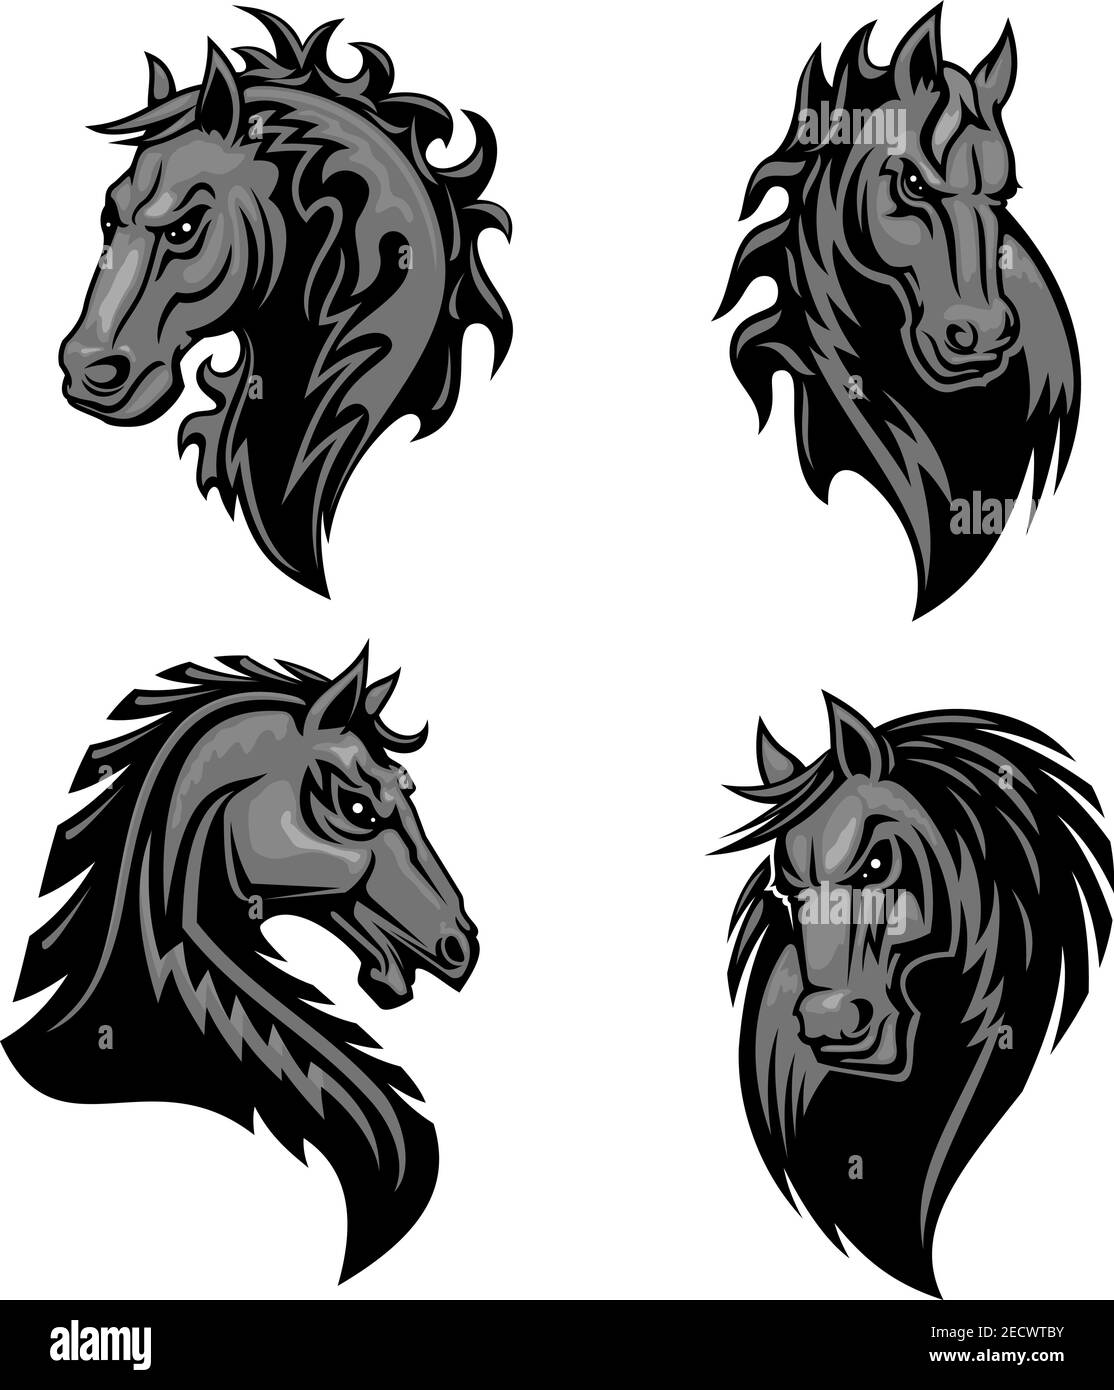 Furious powerful horse head emblem with thorny prickly mane. Stylized heraldic icons of raging stallion. Black mustang symbol for sport club, team bad Stock Vector